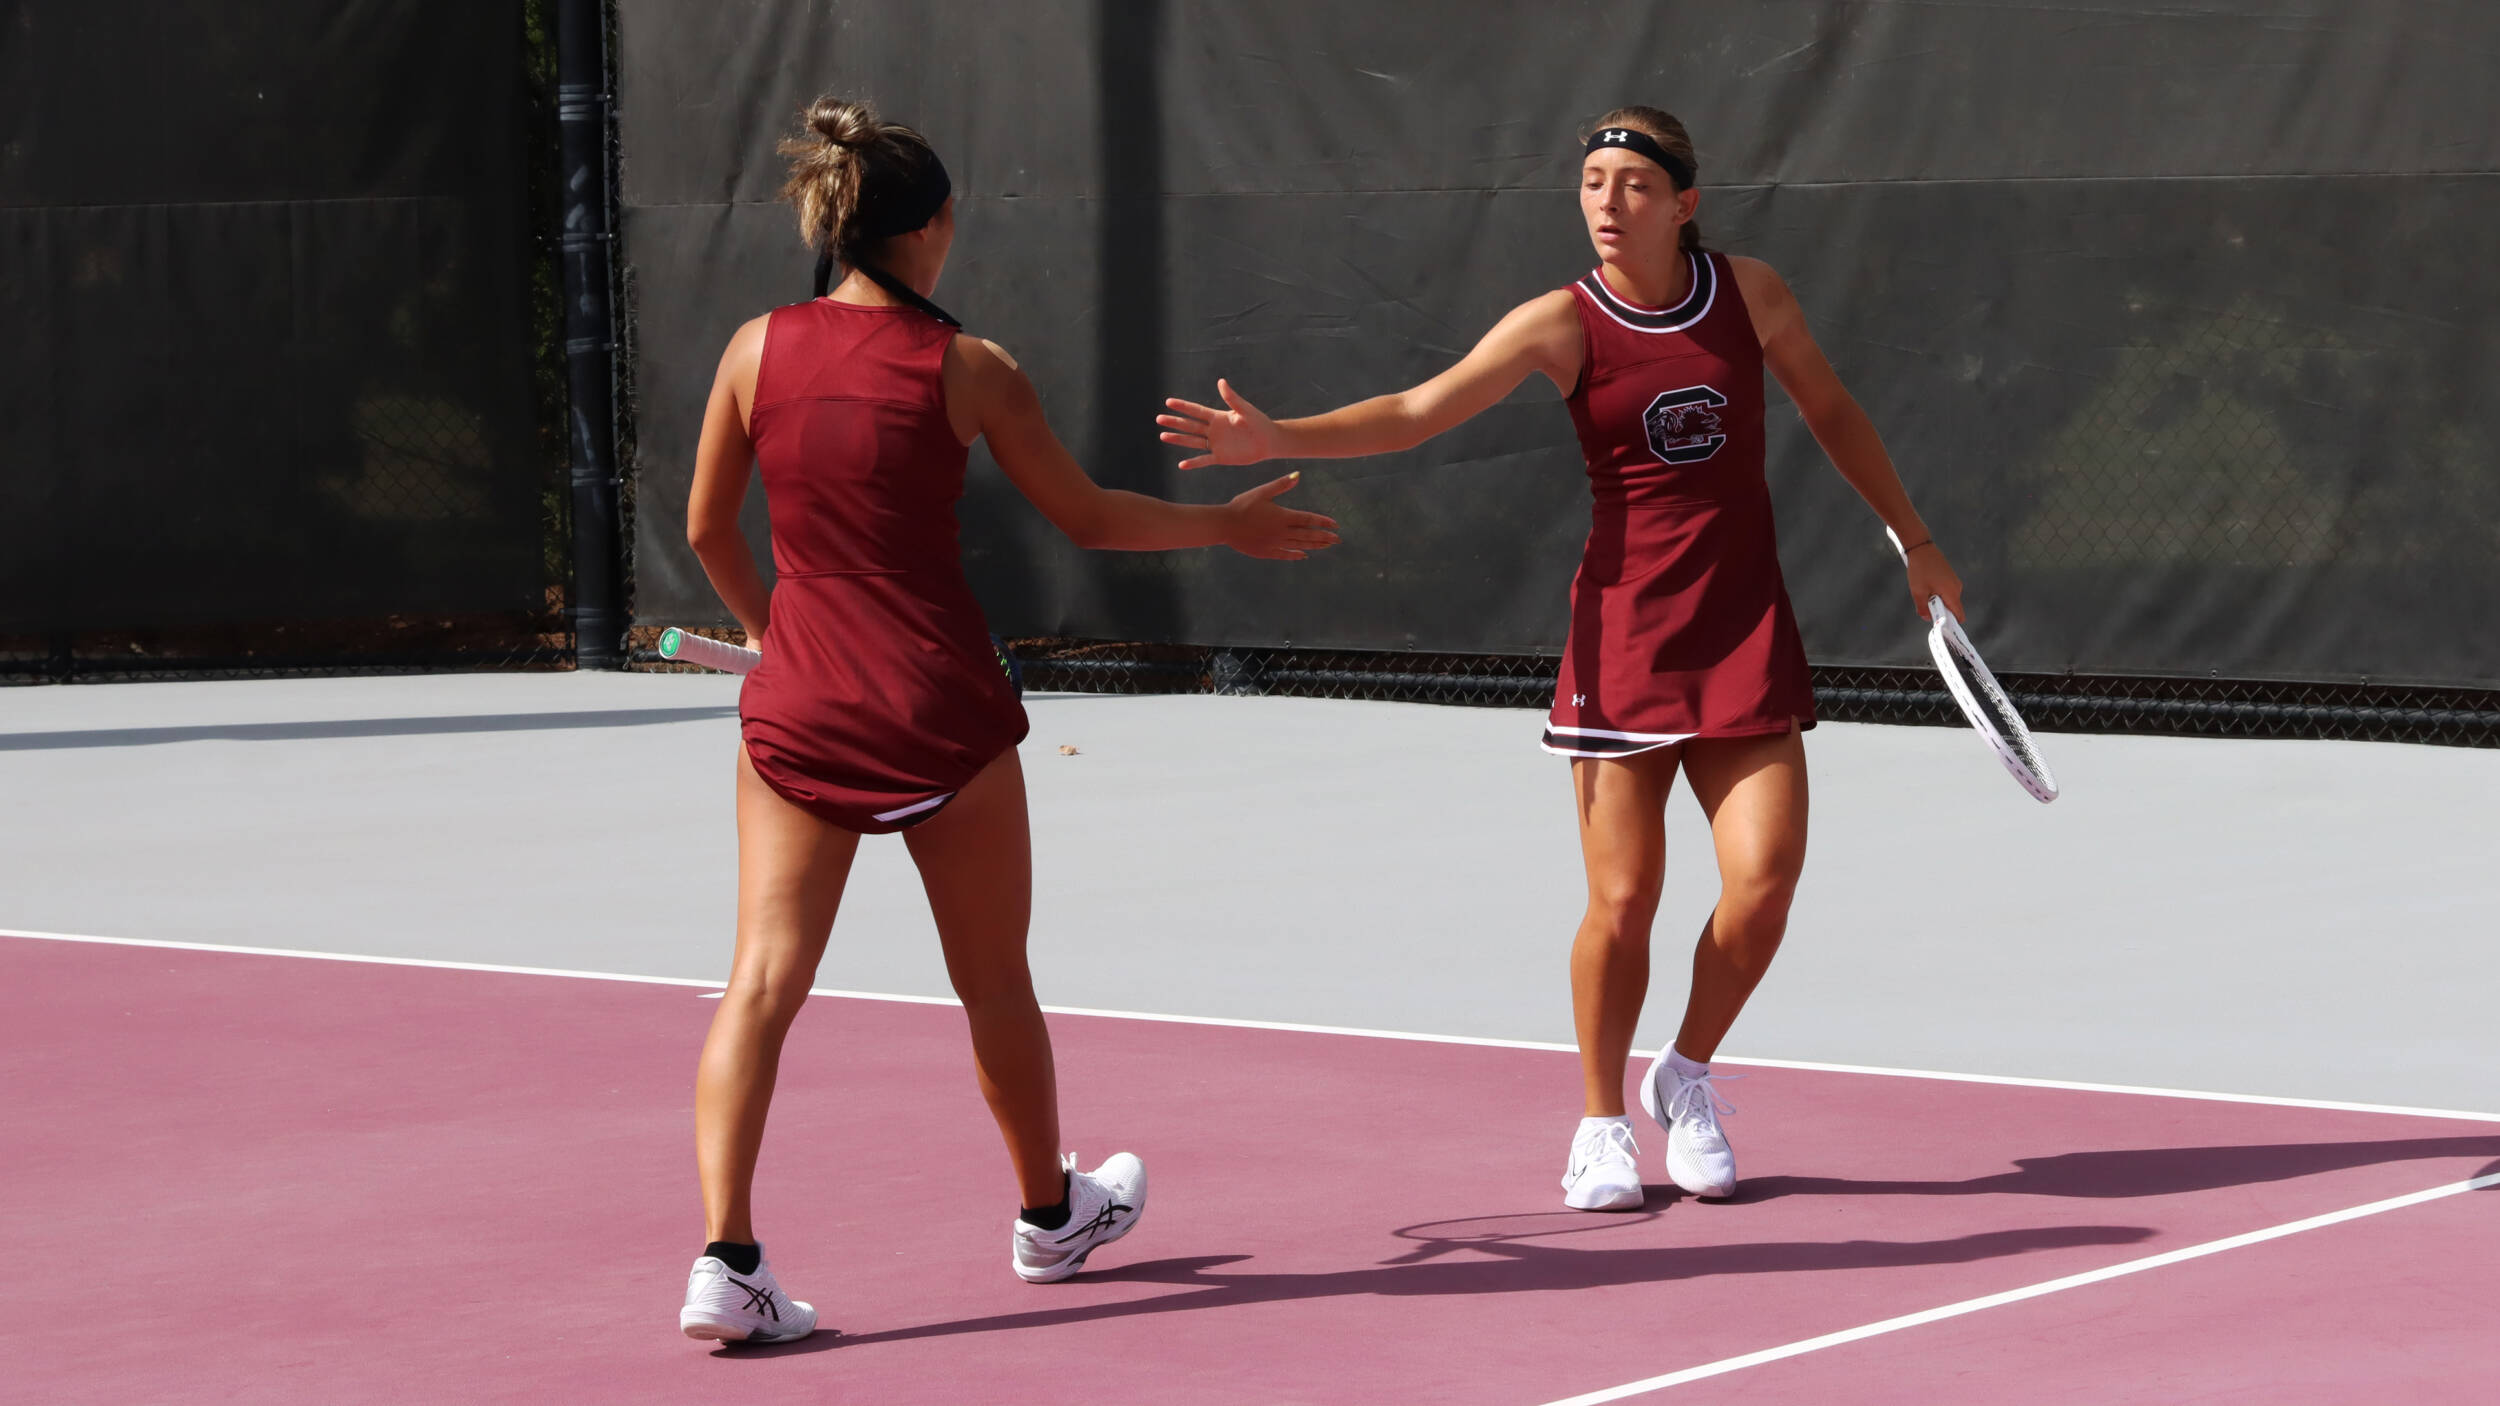 Gamecocks Have Strong Doubles Showing on First Day of Home Tournament